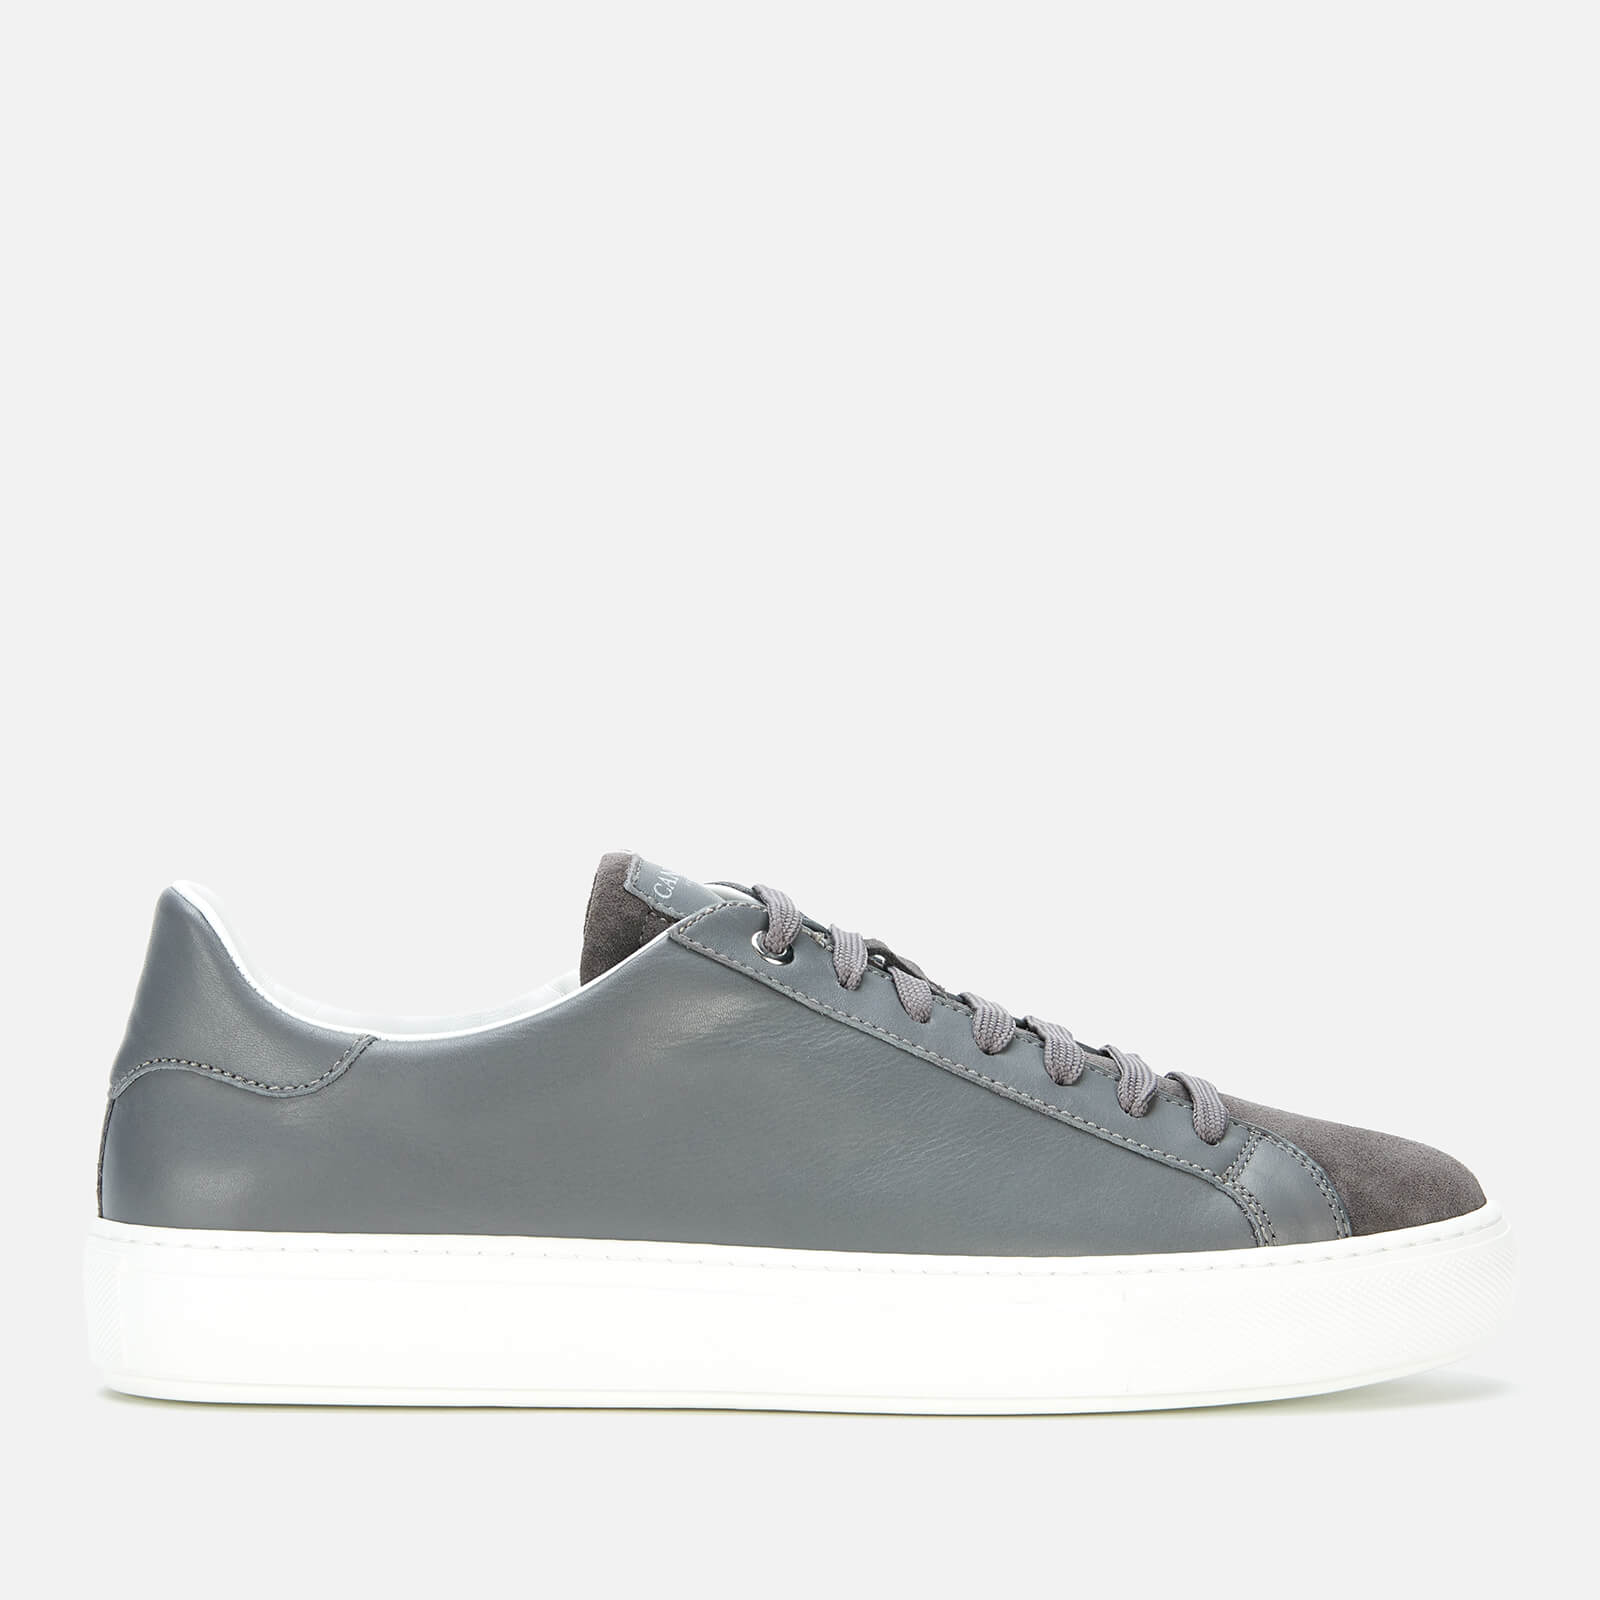 Canali Men's Lace Up Classic Leather Sneakers - Grey - UK 6